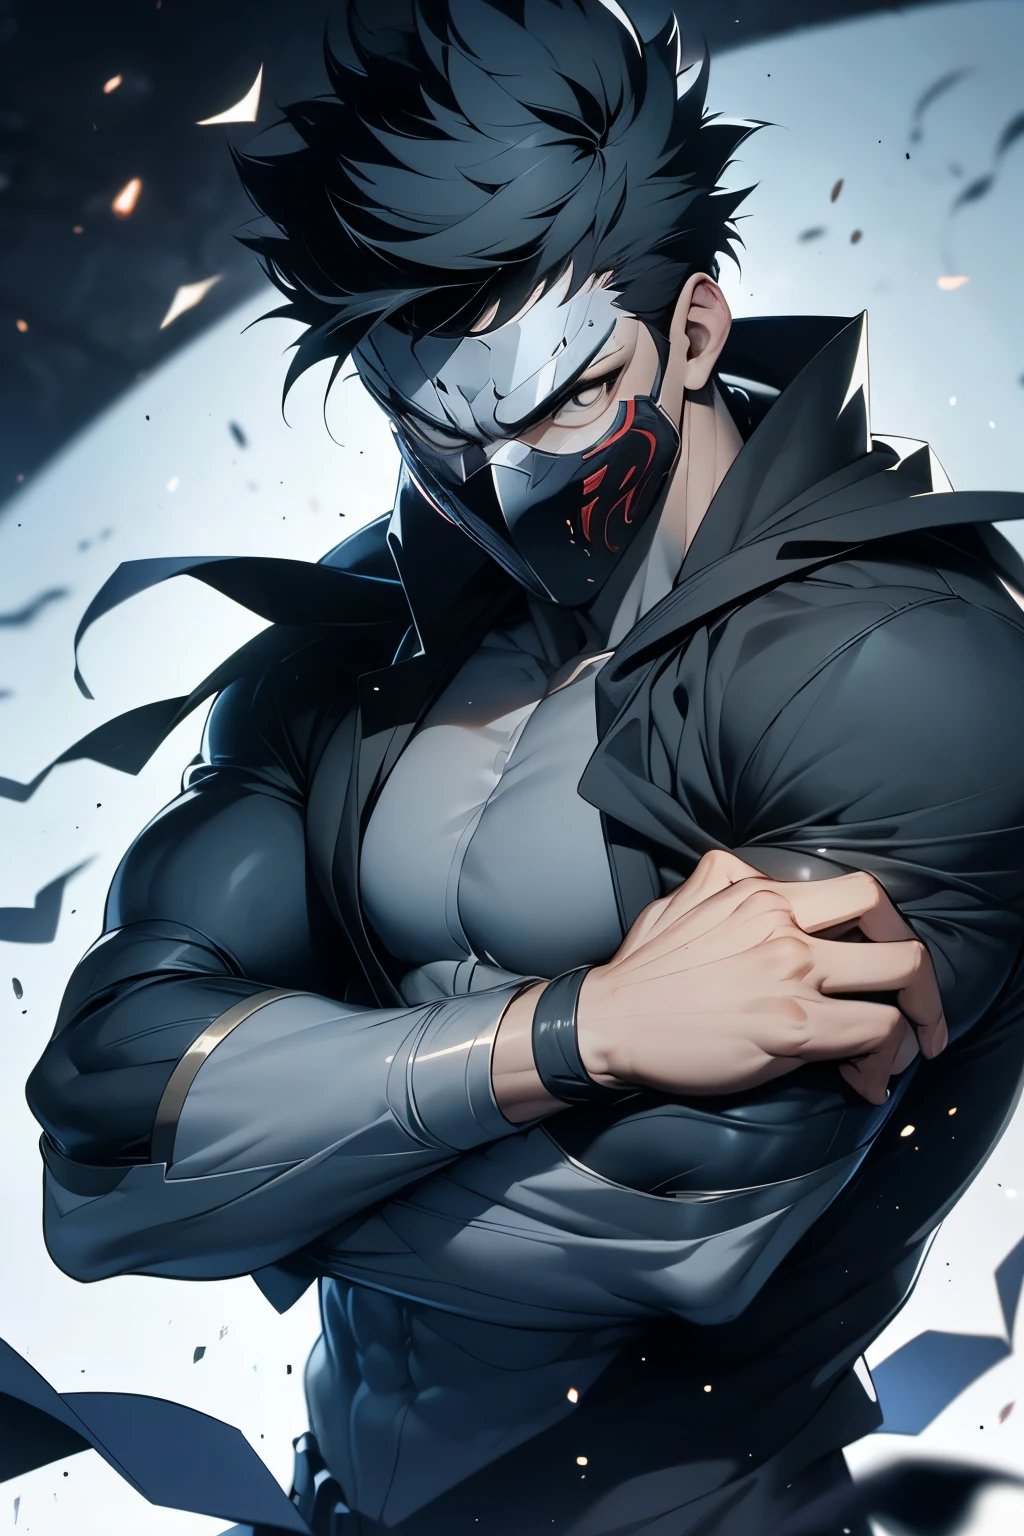 A tall and powerful man wearing a Grey Button Shirt, Super Short Black hair, Wearing Metallic mask and hiding identity. Muscular Forearms and ready to fight
